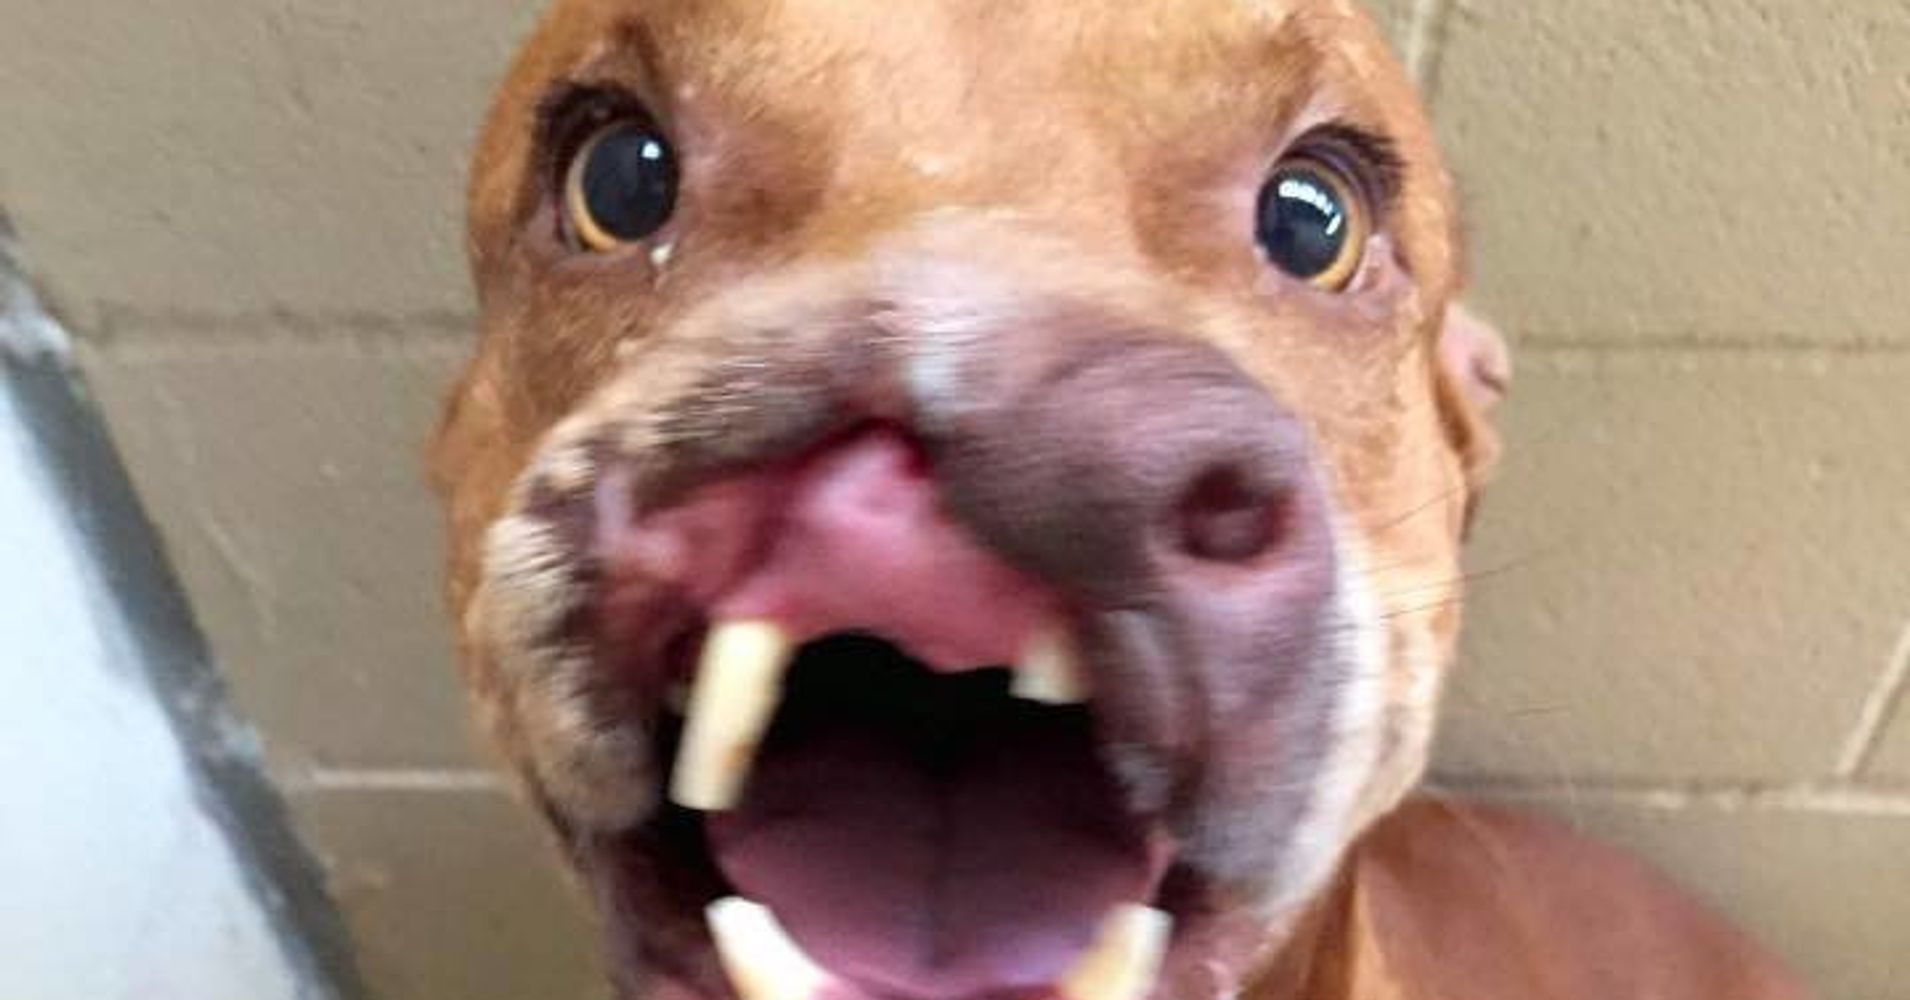 Sweet Dog With Half A Nose Is On The Brink Of A Wonderful Life | HuffPost